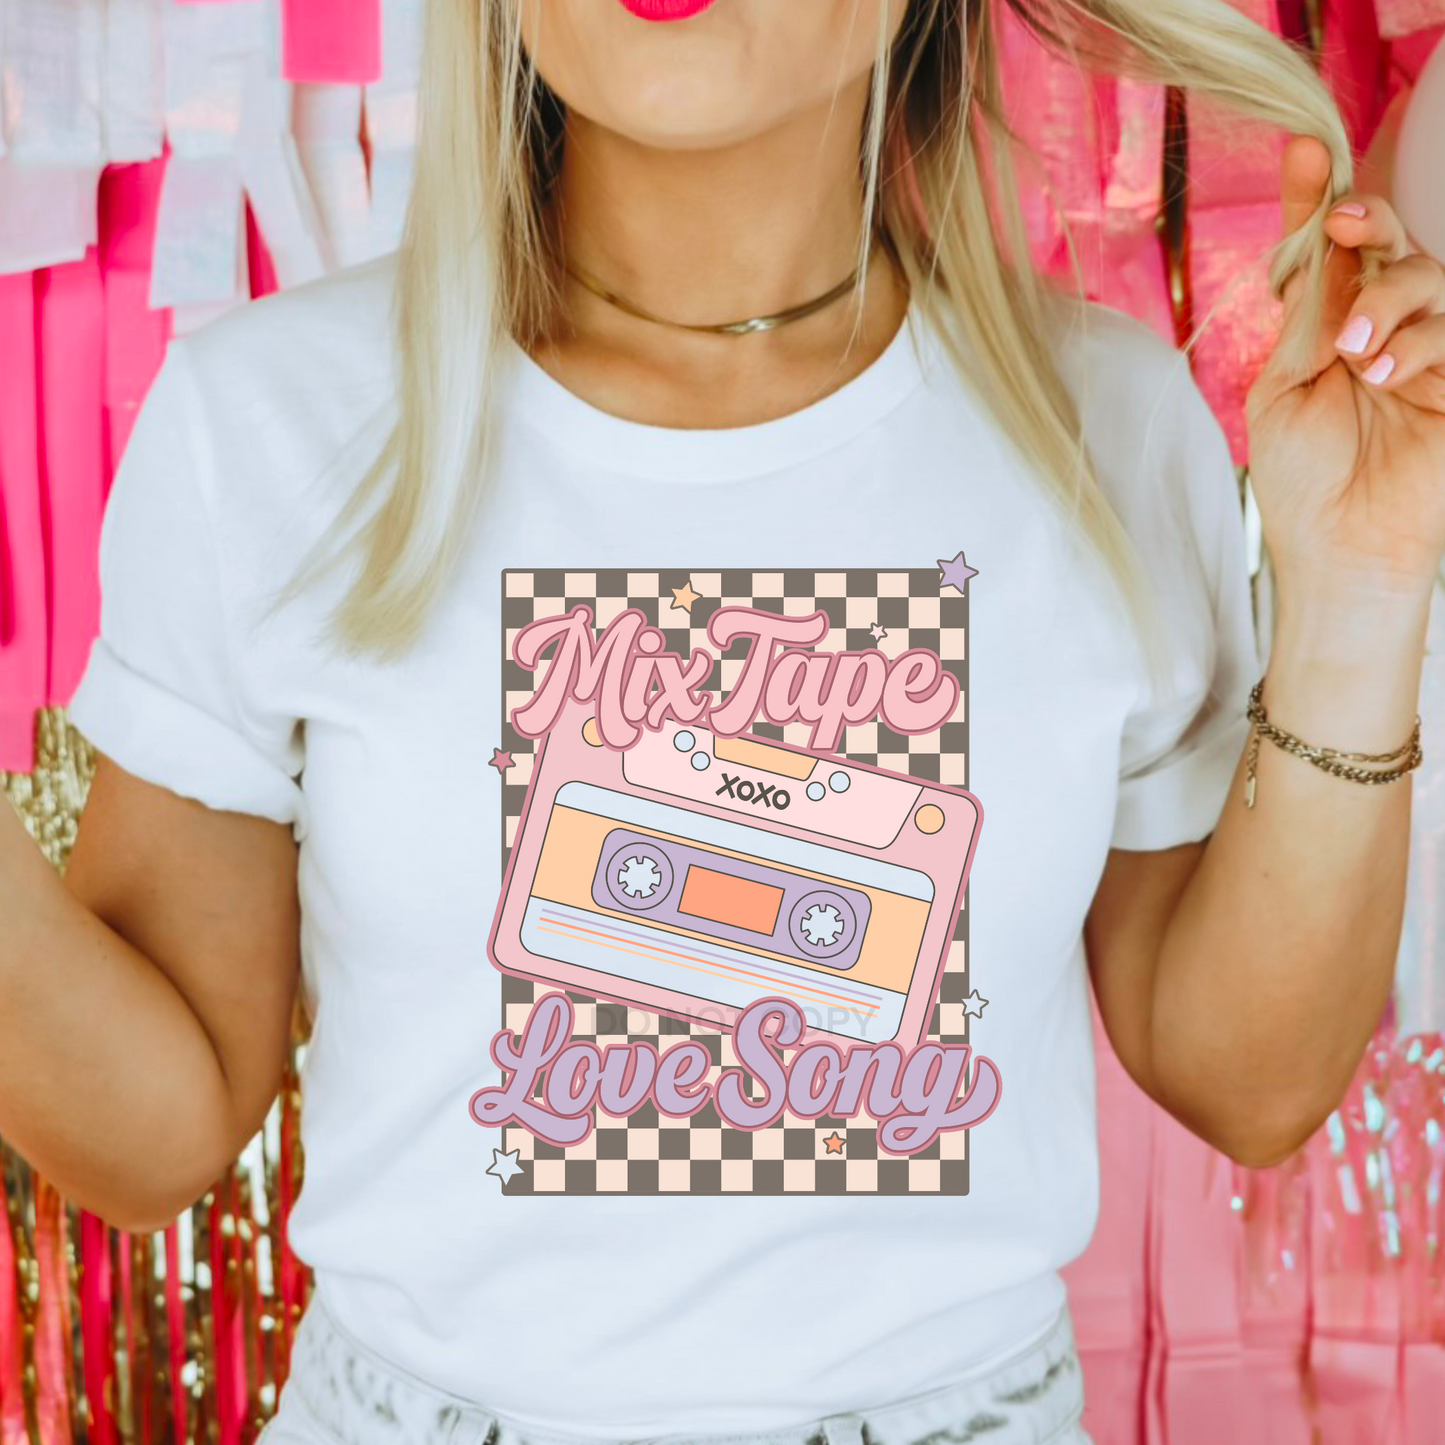 Mix Tape Love Songs Sublimation Transfer